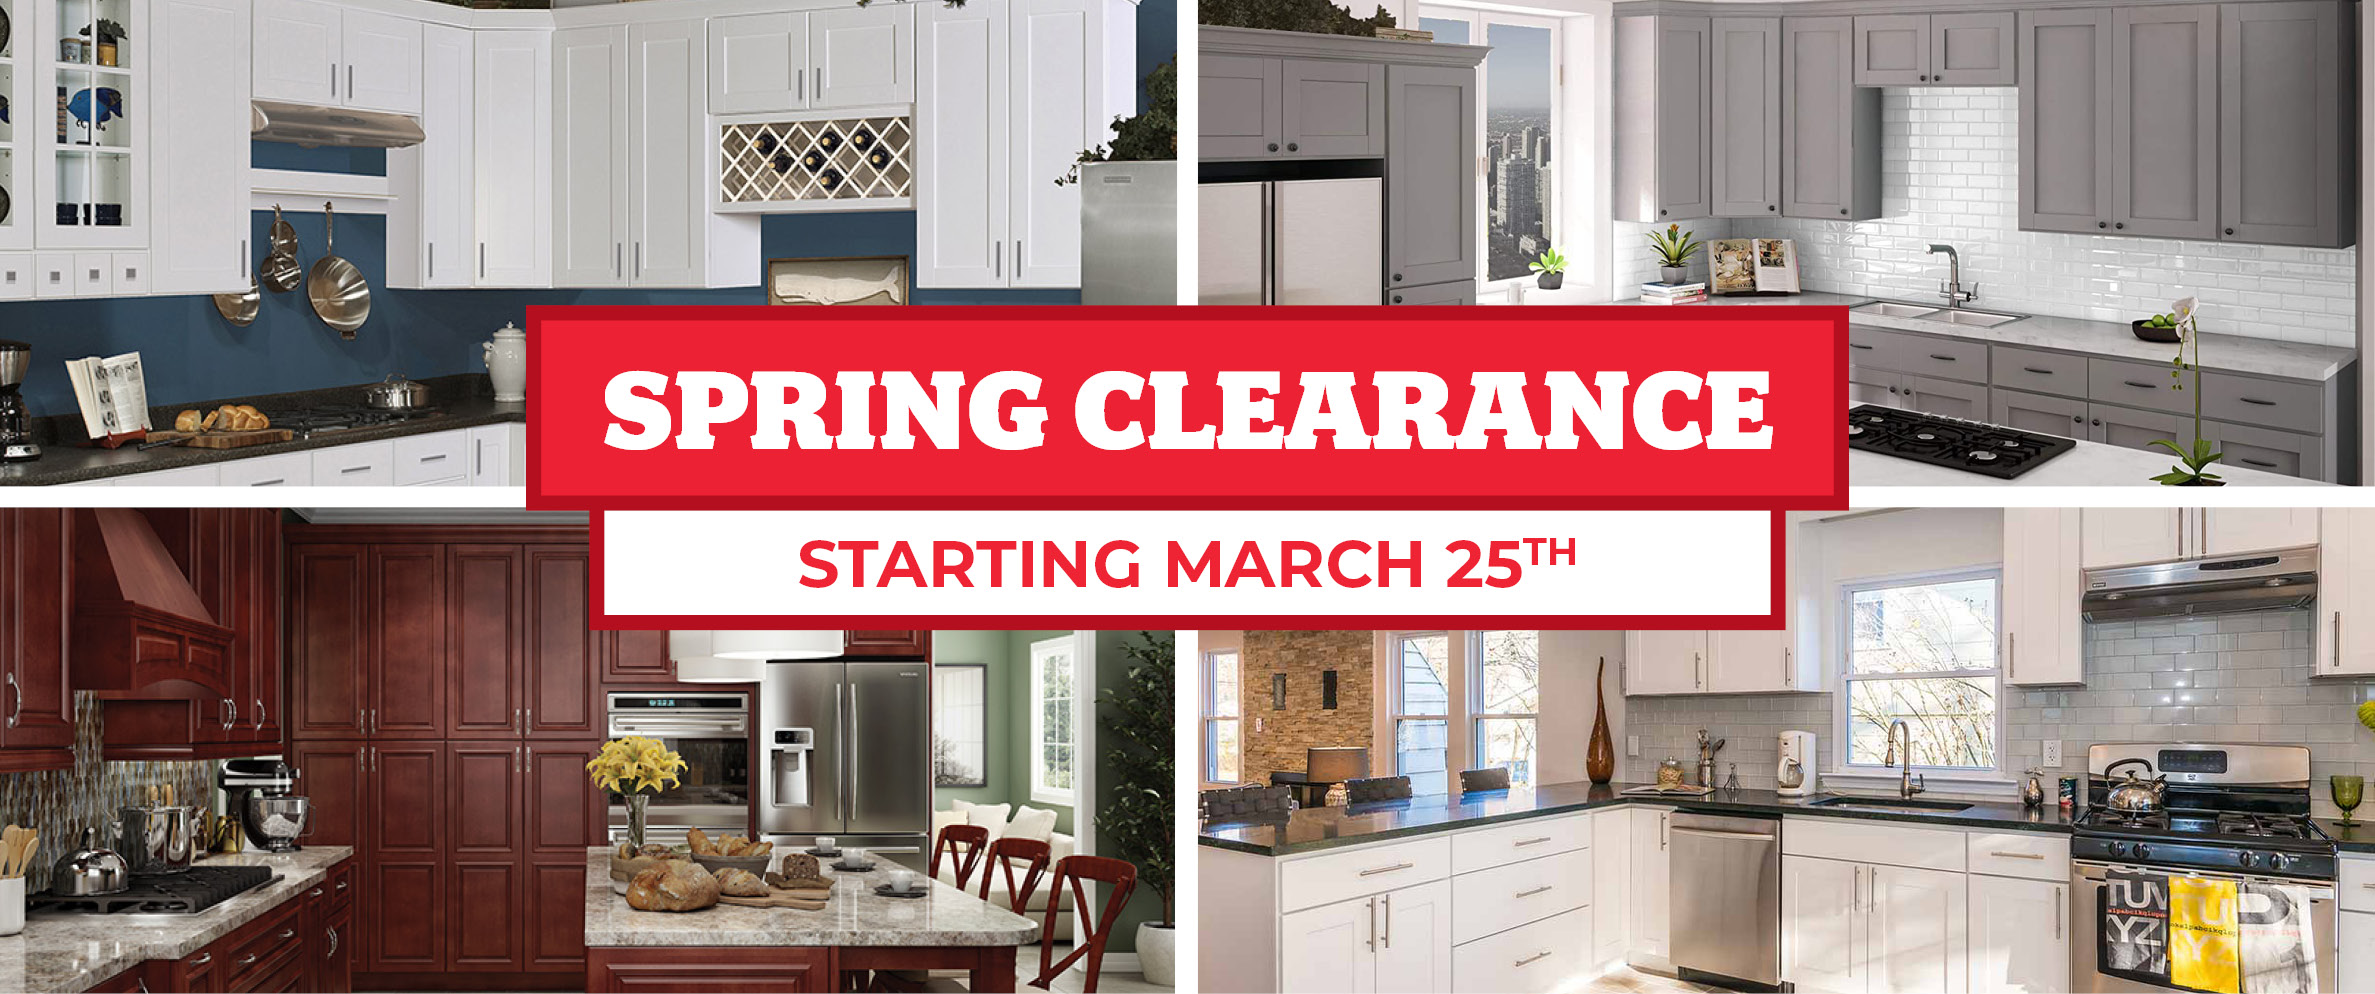 Spring Clearance web graphic MD